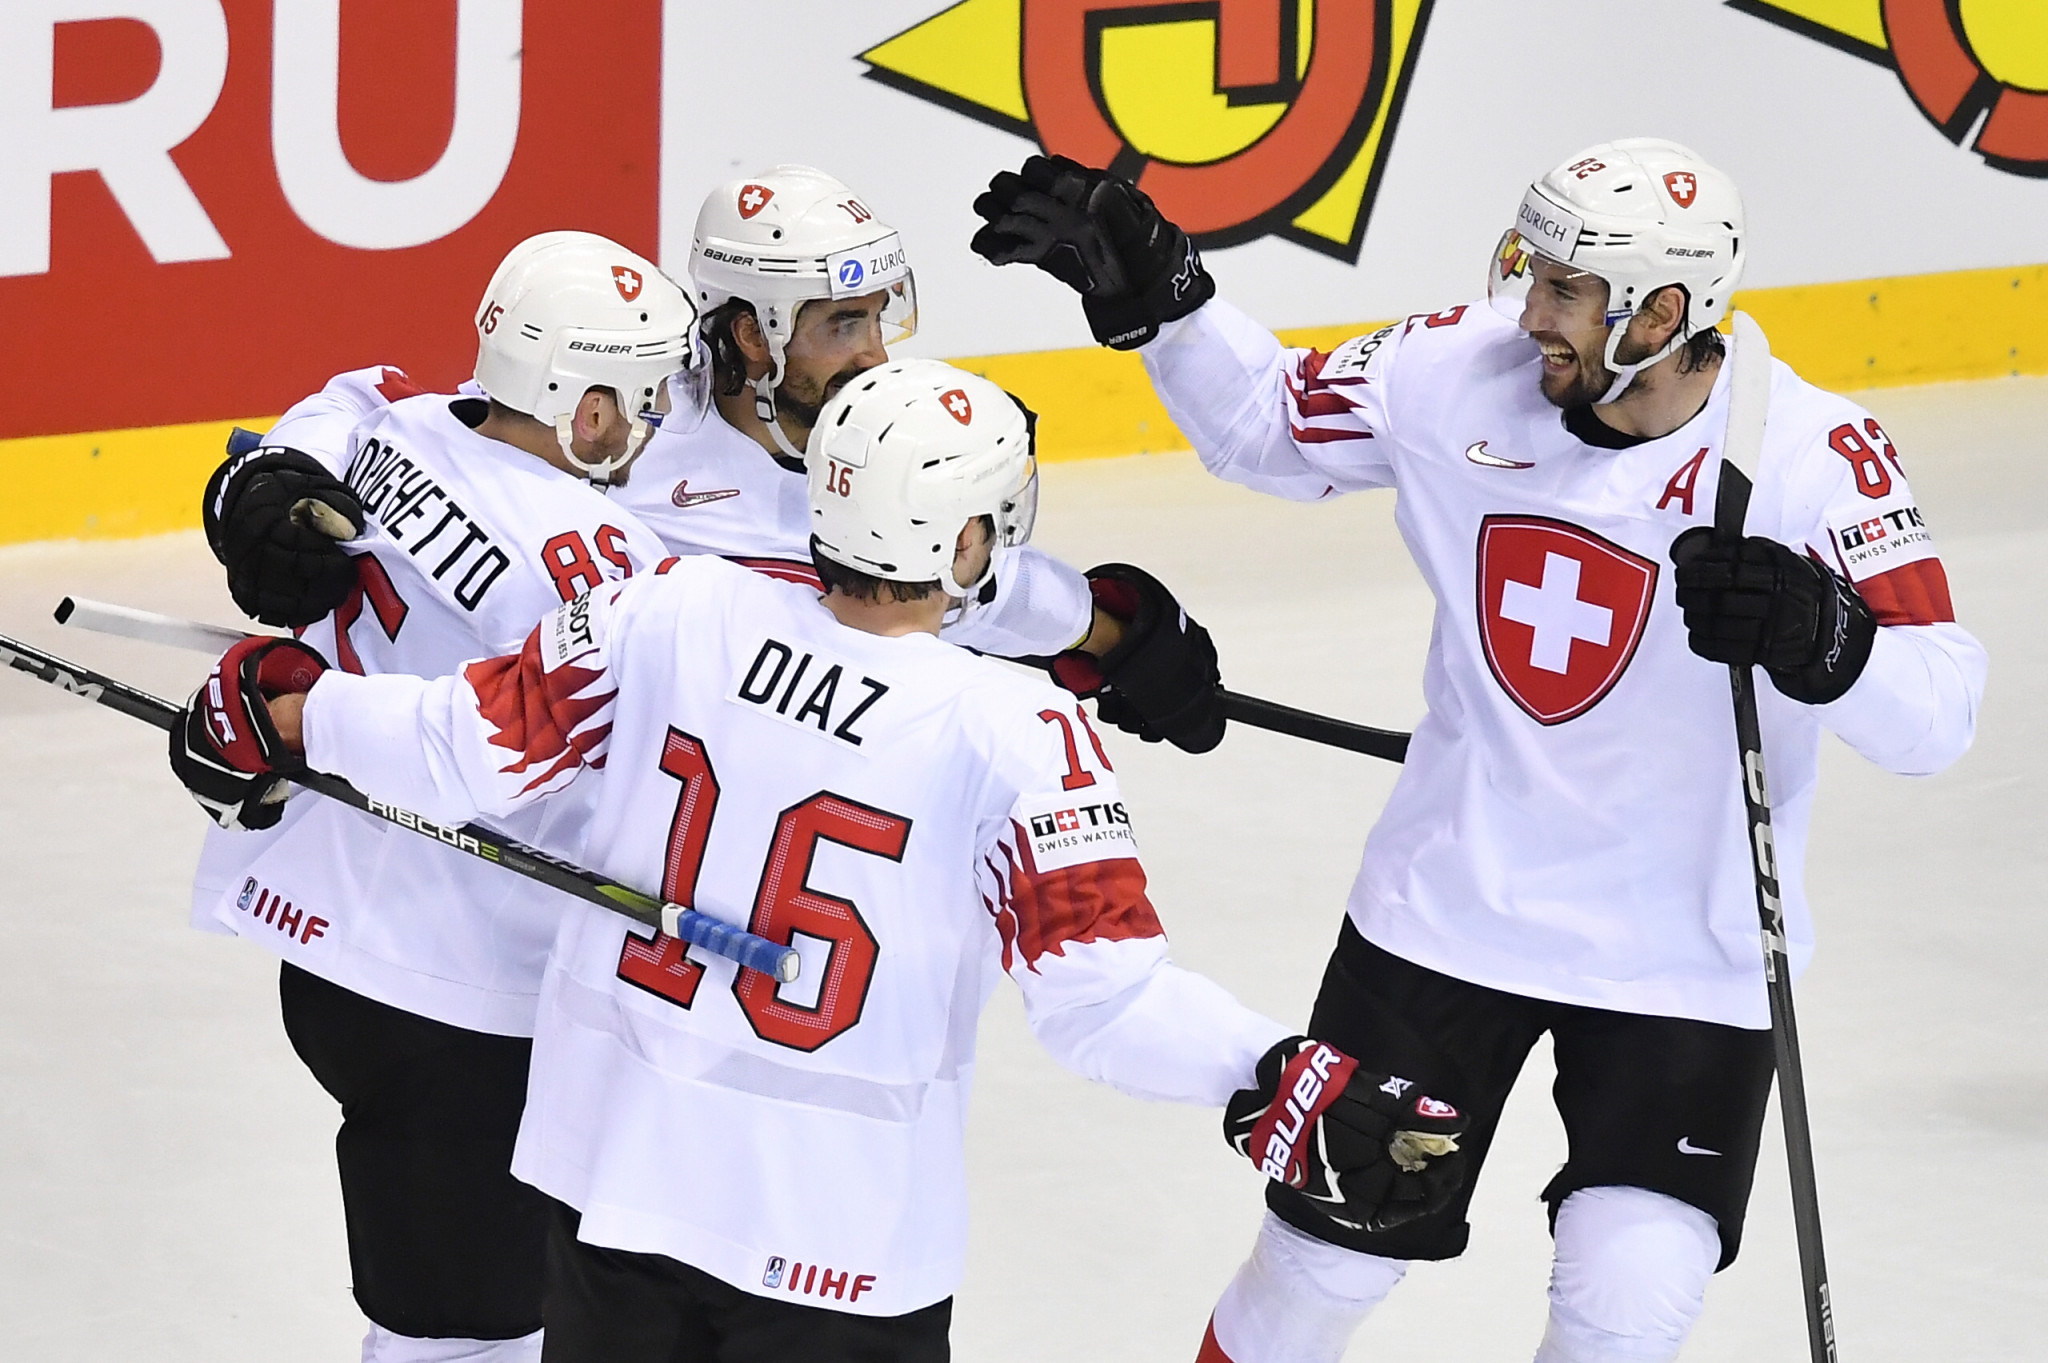 Hosts Switzerland will compete in the 2020 IIHF World Championships alongside 15 other teams ©Getty Images